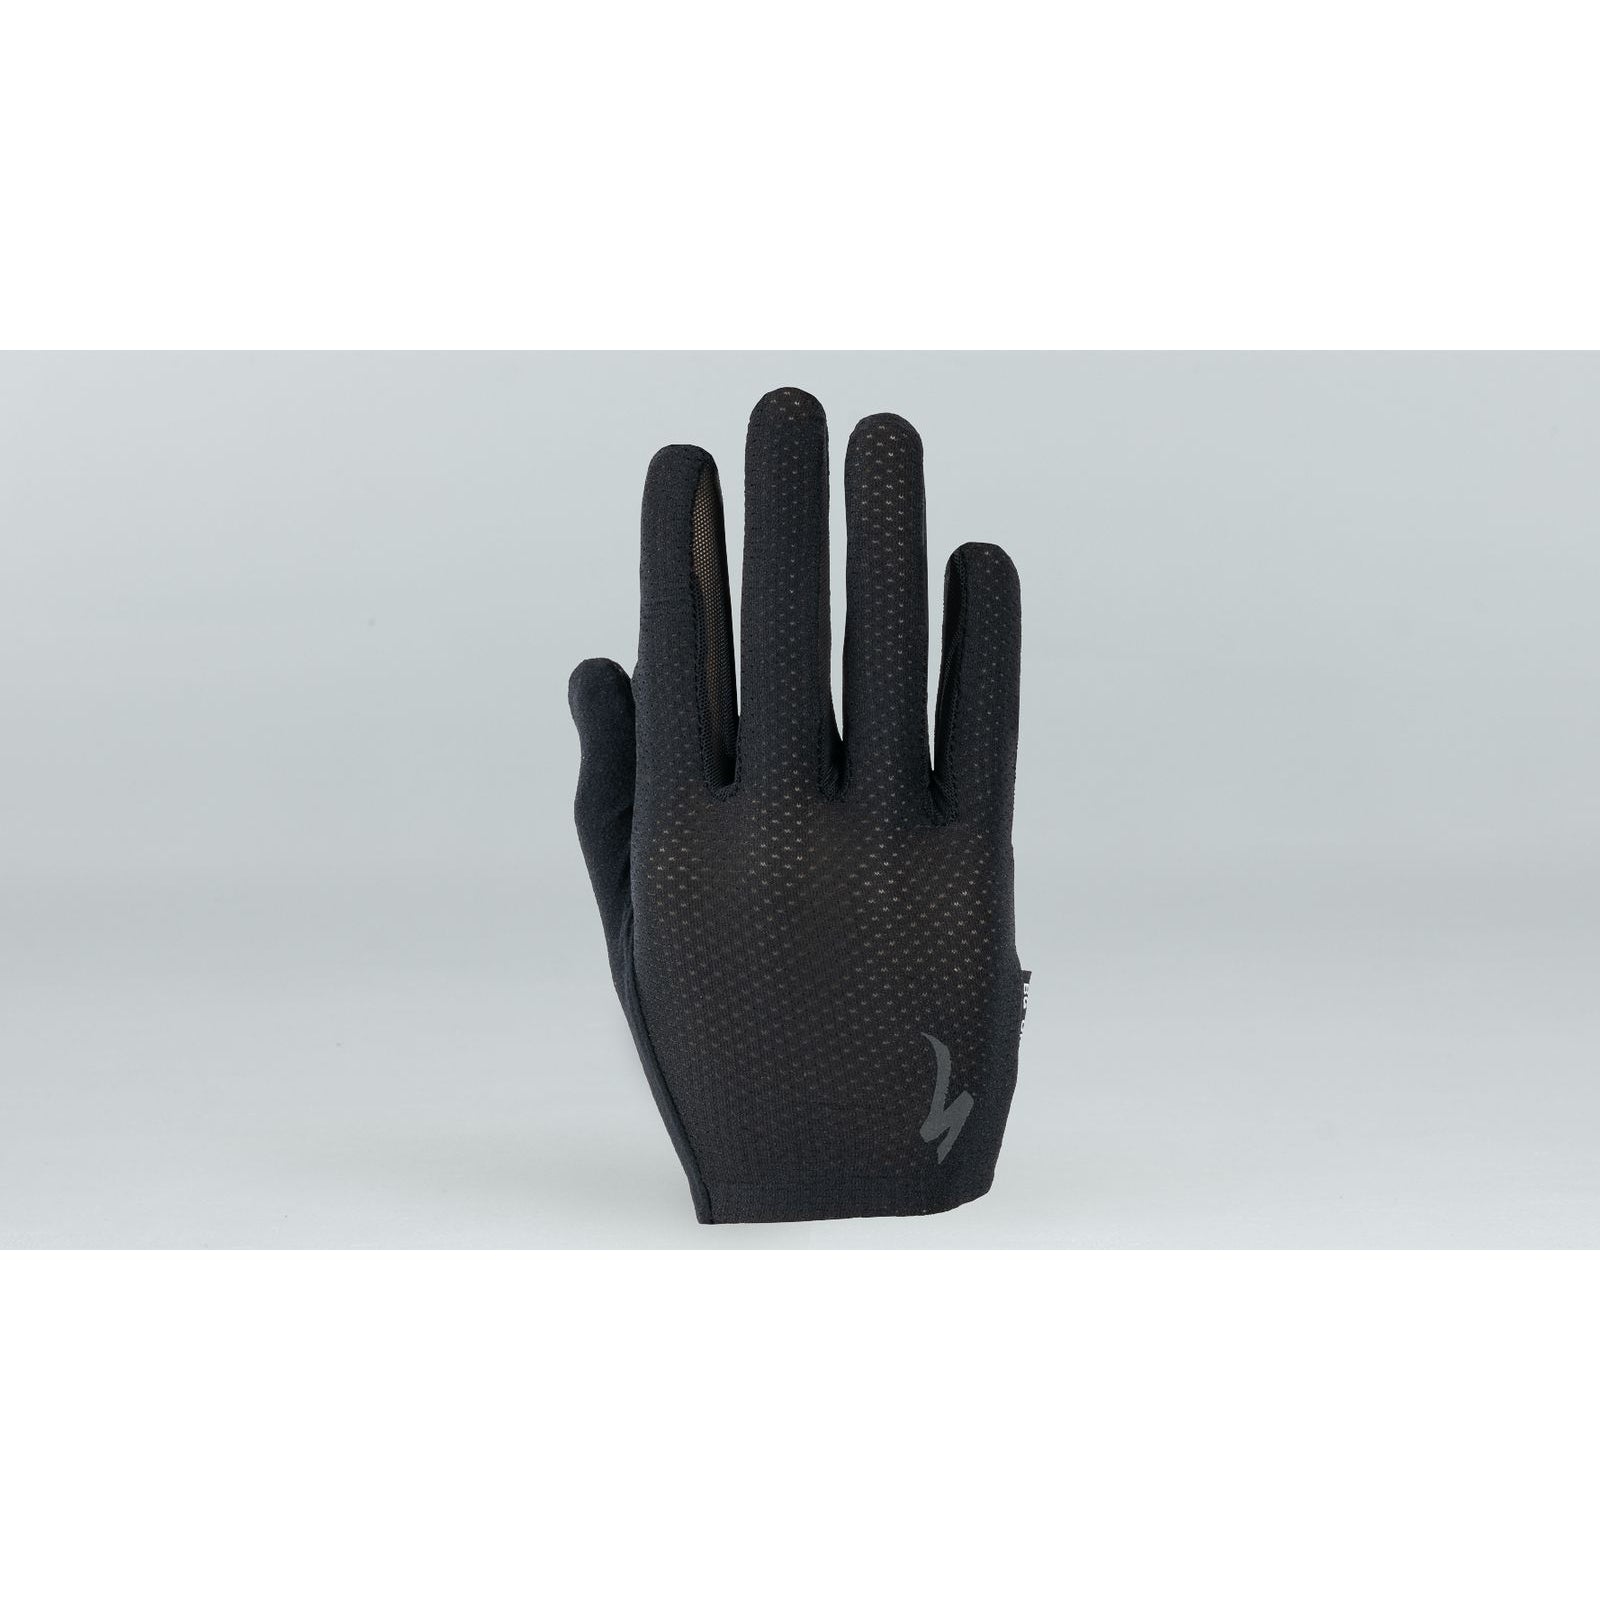 Specialized Men's Body Geometry Grail Long Finger Gloves - Gloves - Bicycle Warehouse